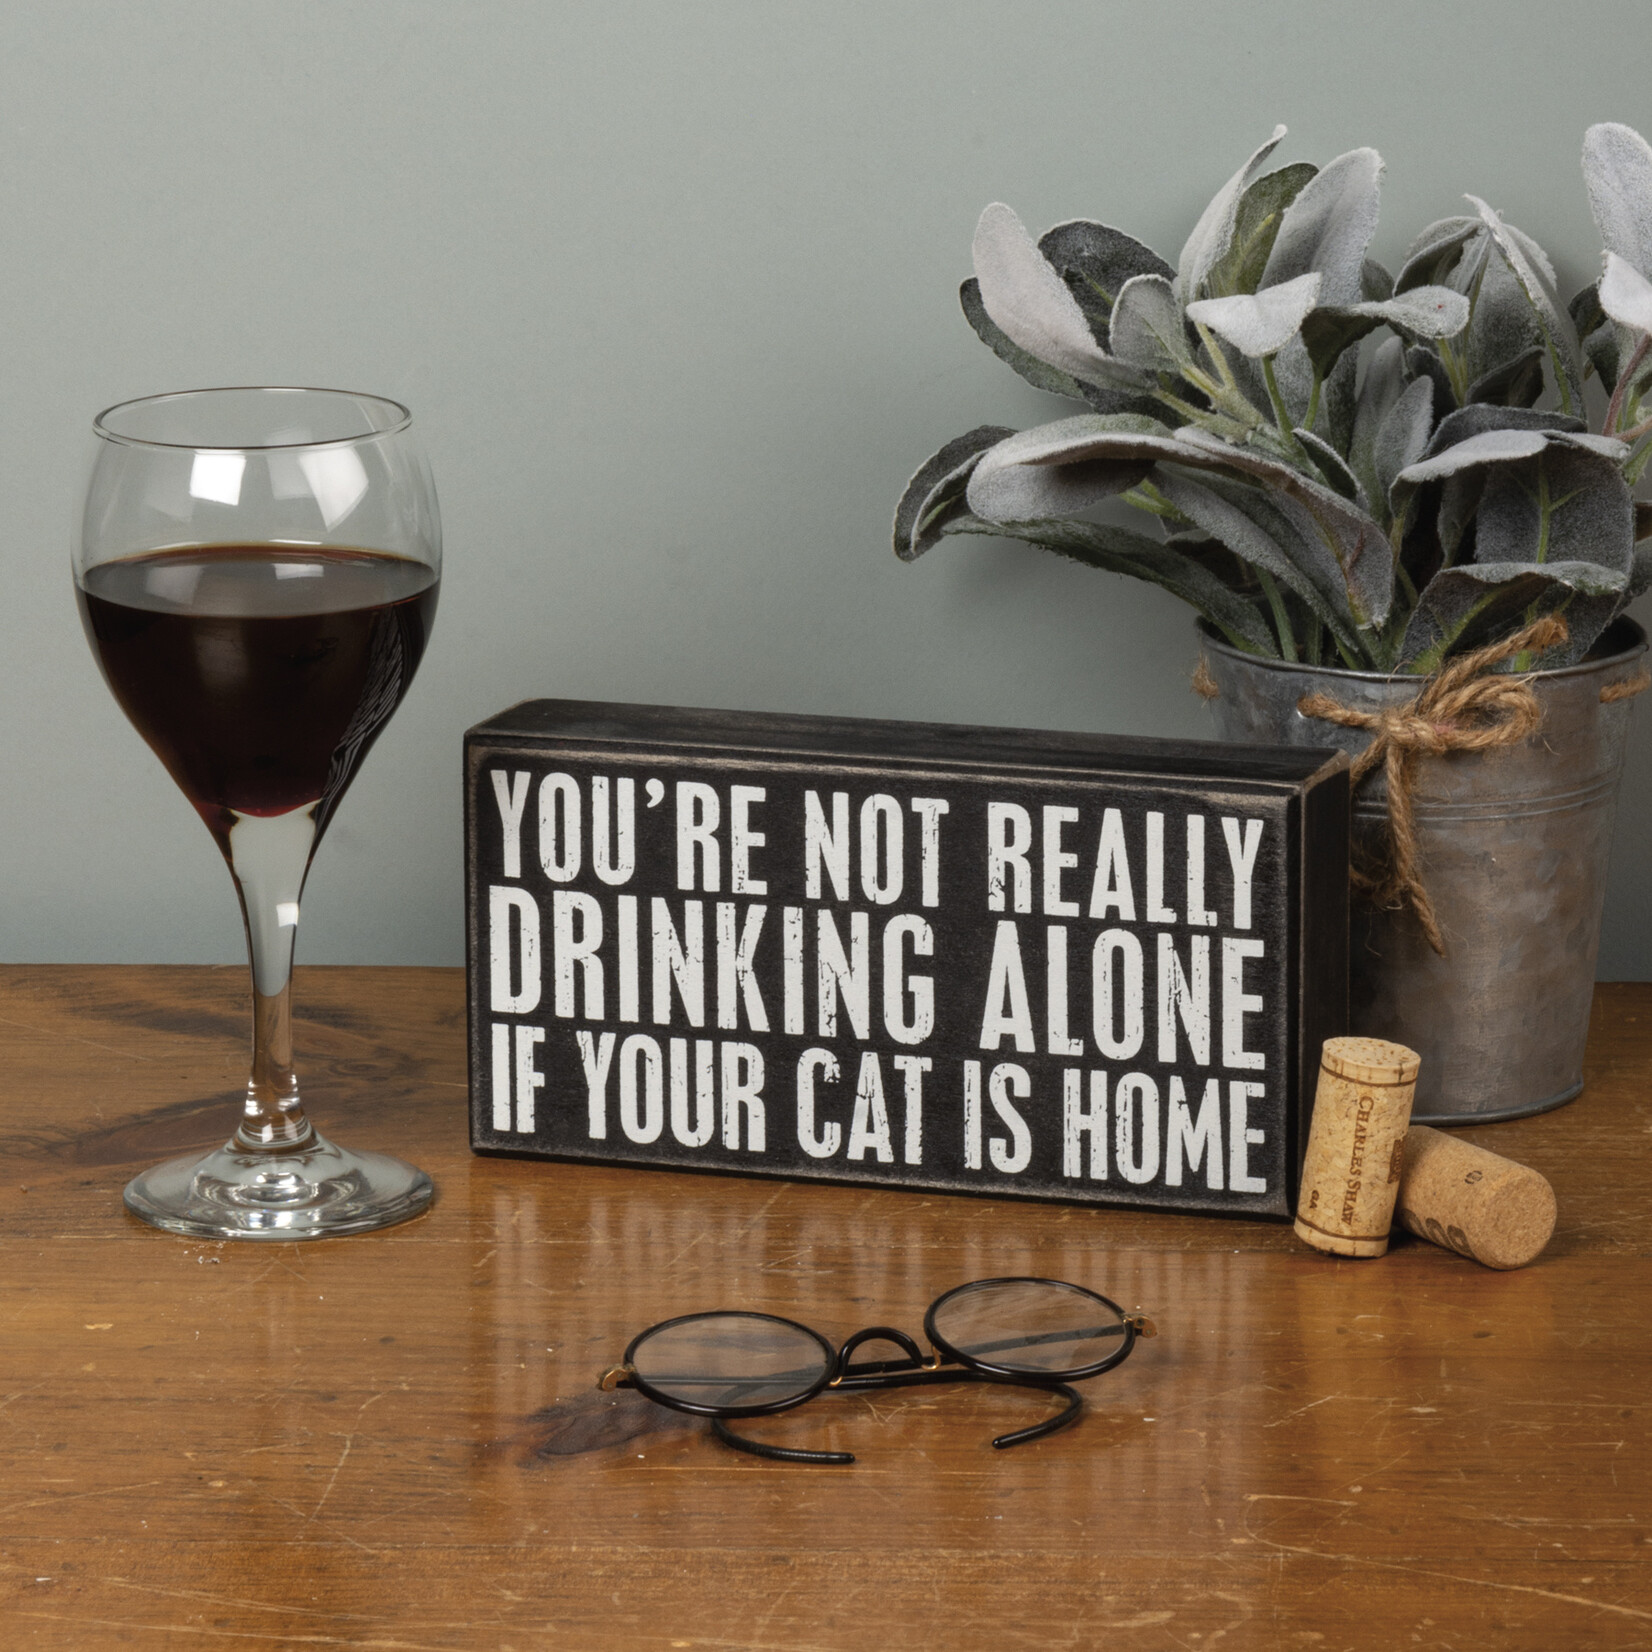 Primitives by Kathy Primitives by Kathy -Drinking Alone Box Sign